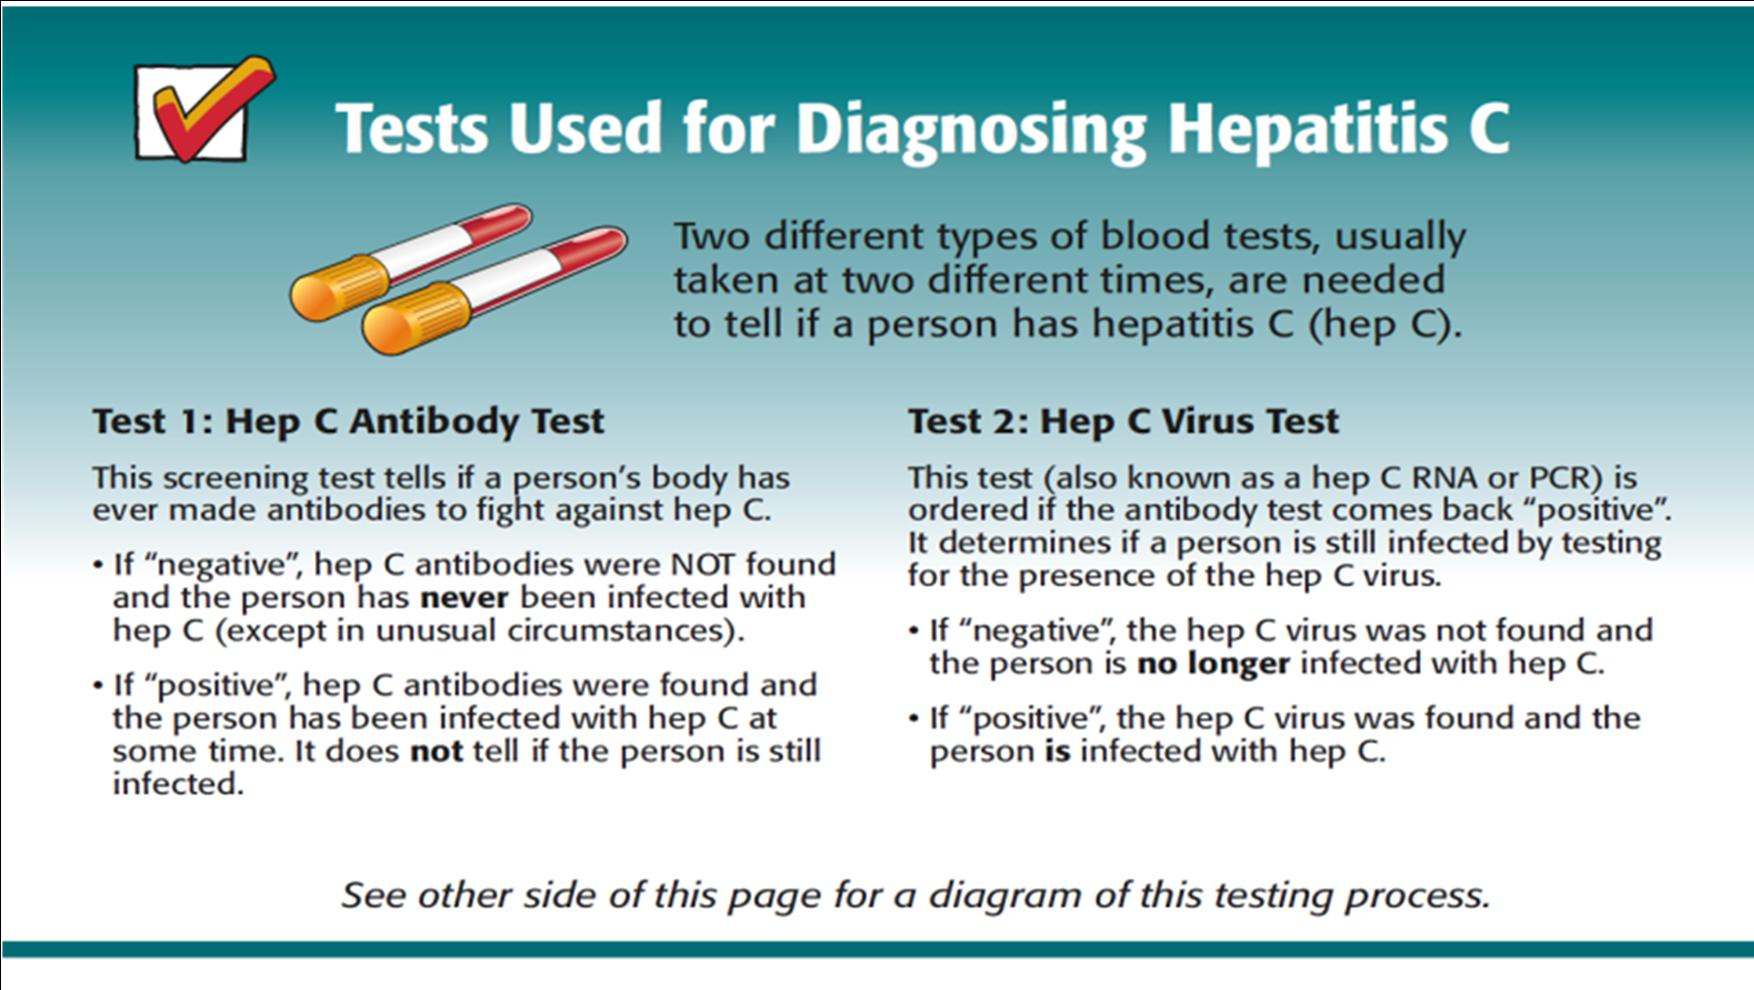 Tests Used to Diagnose Hepatitis C